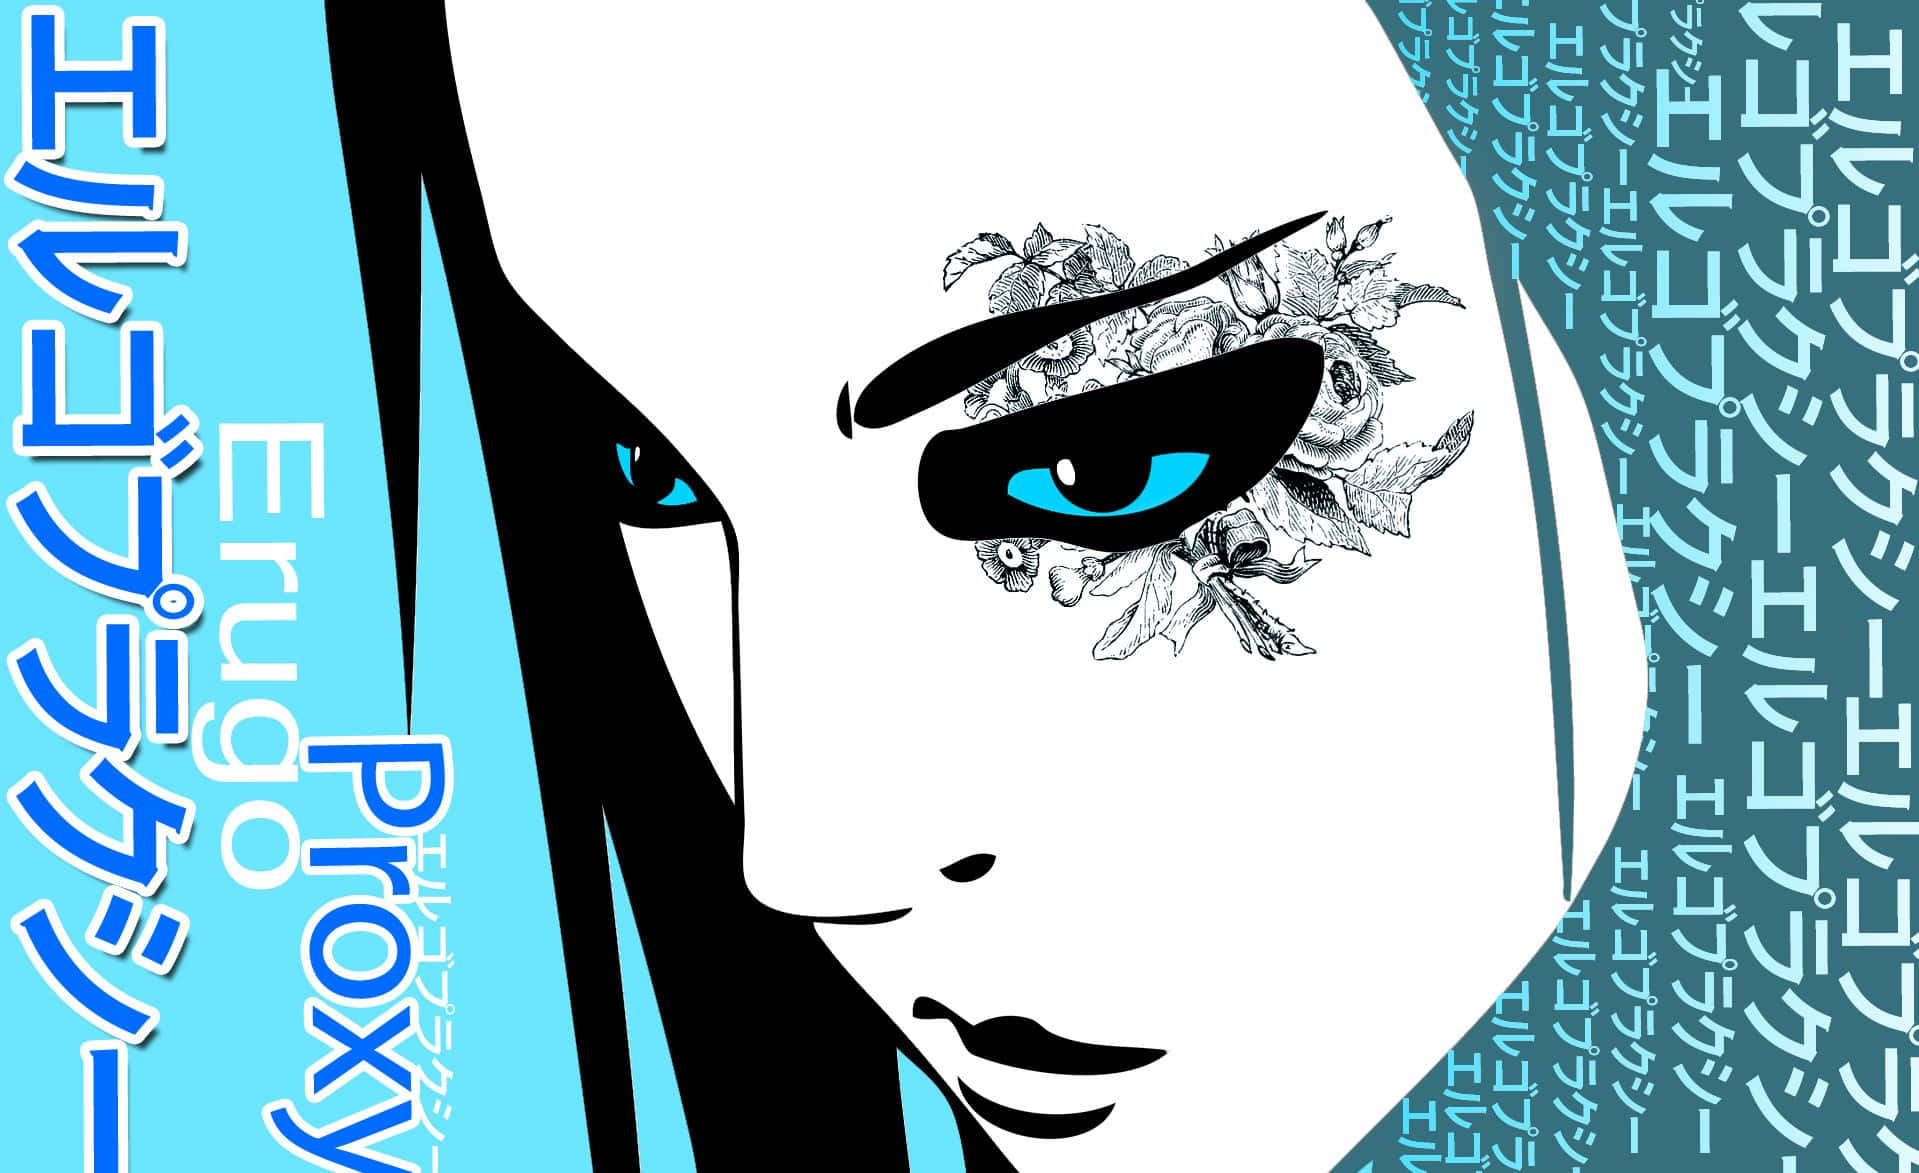 Download Protagonists Of Anime Series, Ergo Proxy Wallpaper